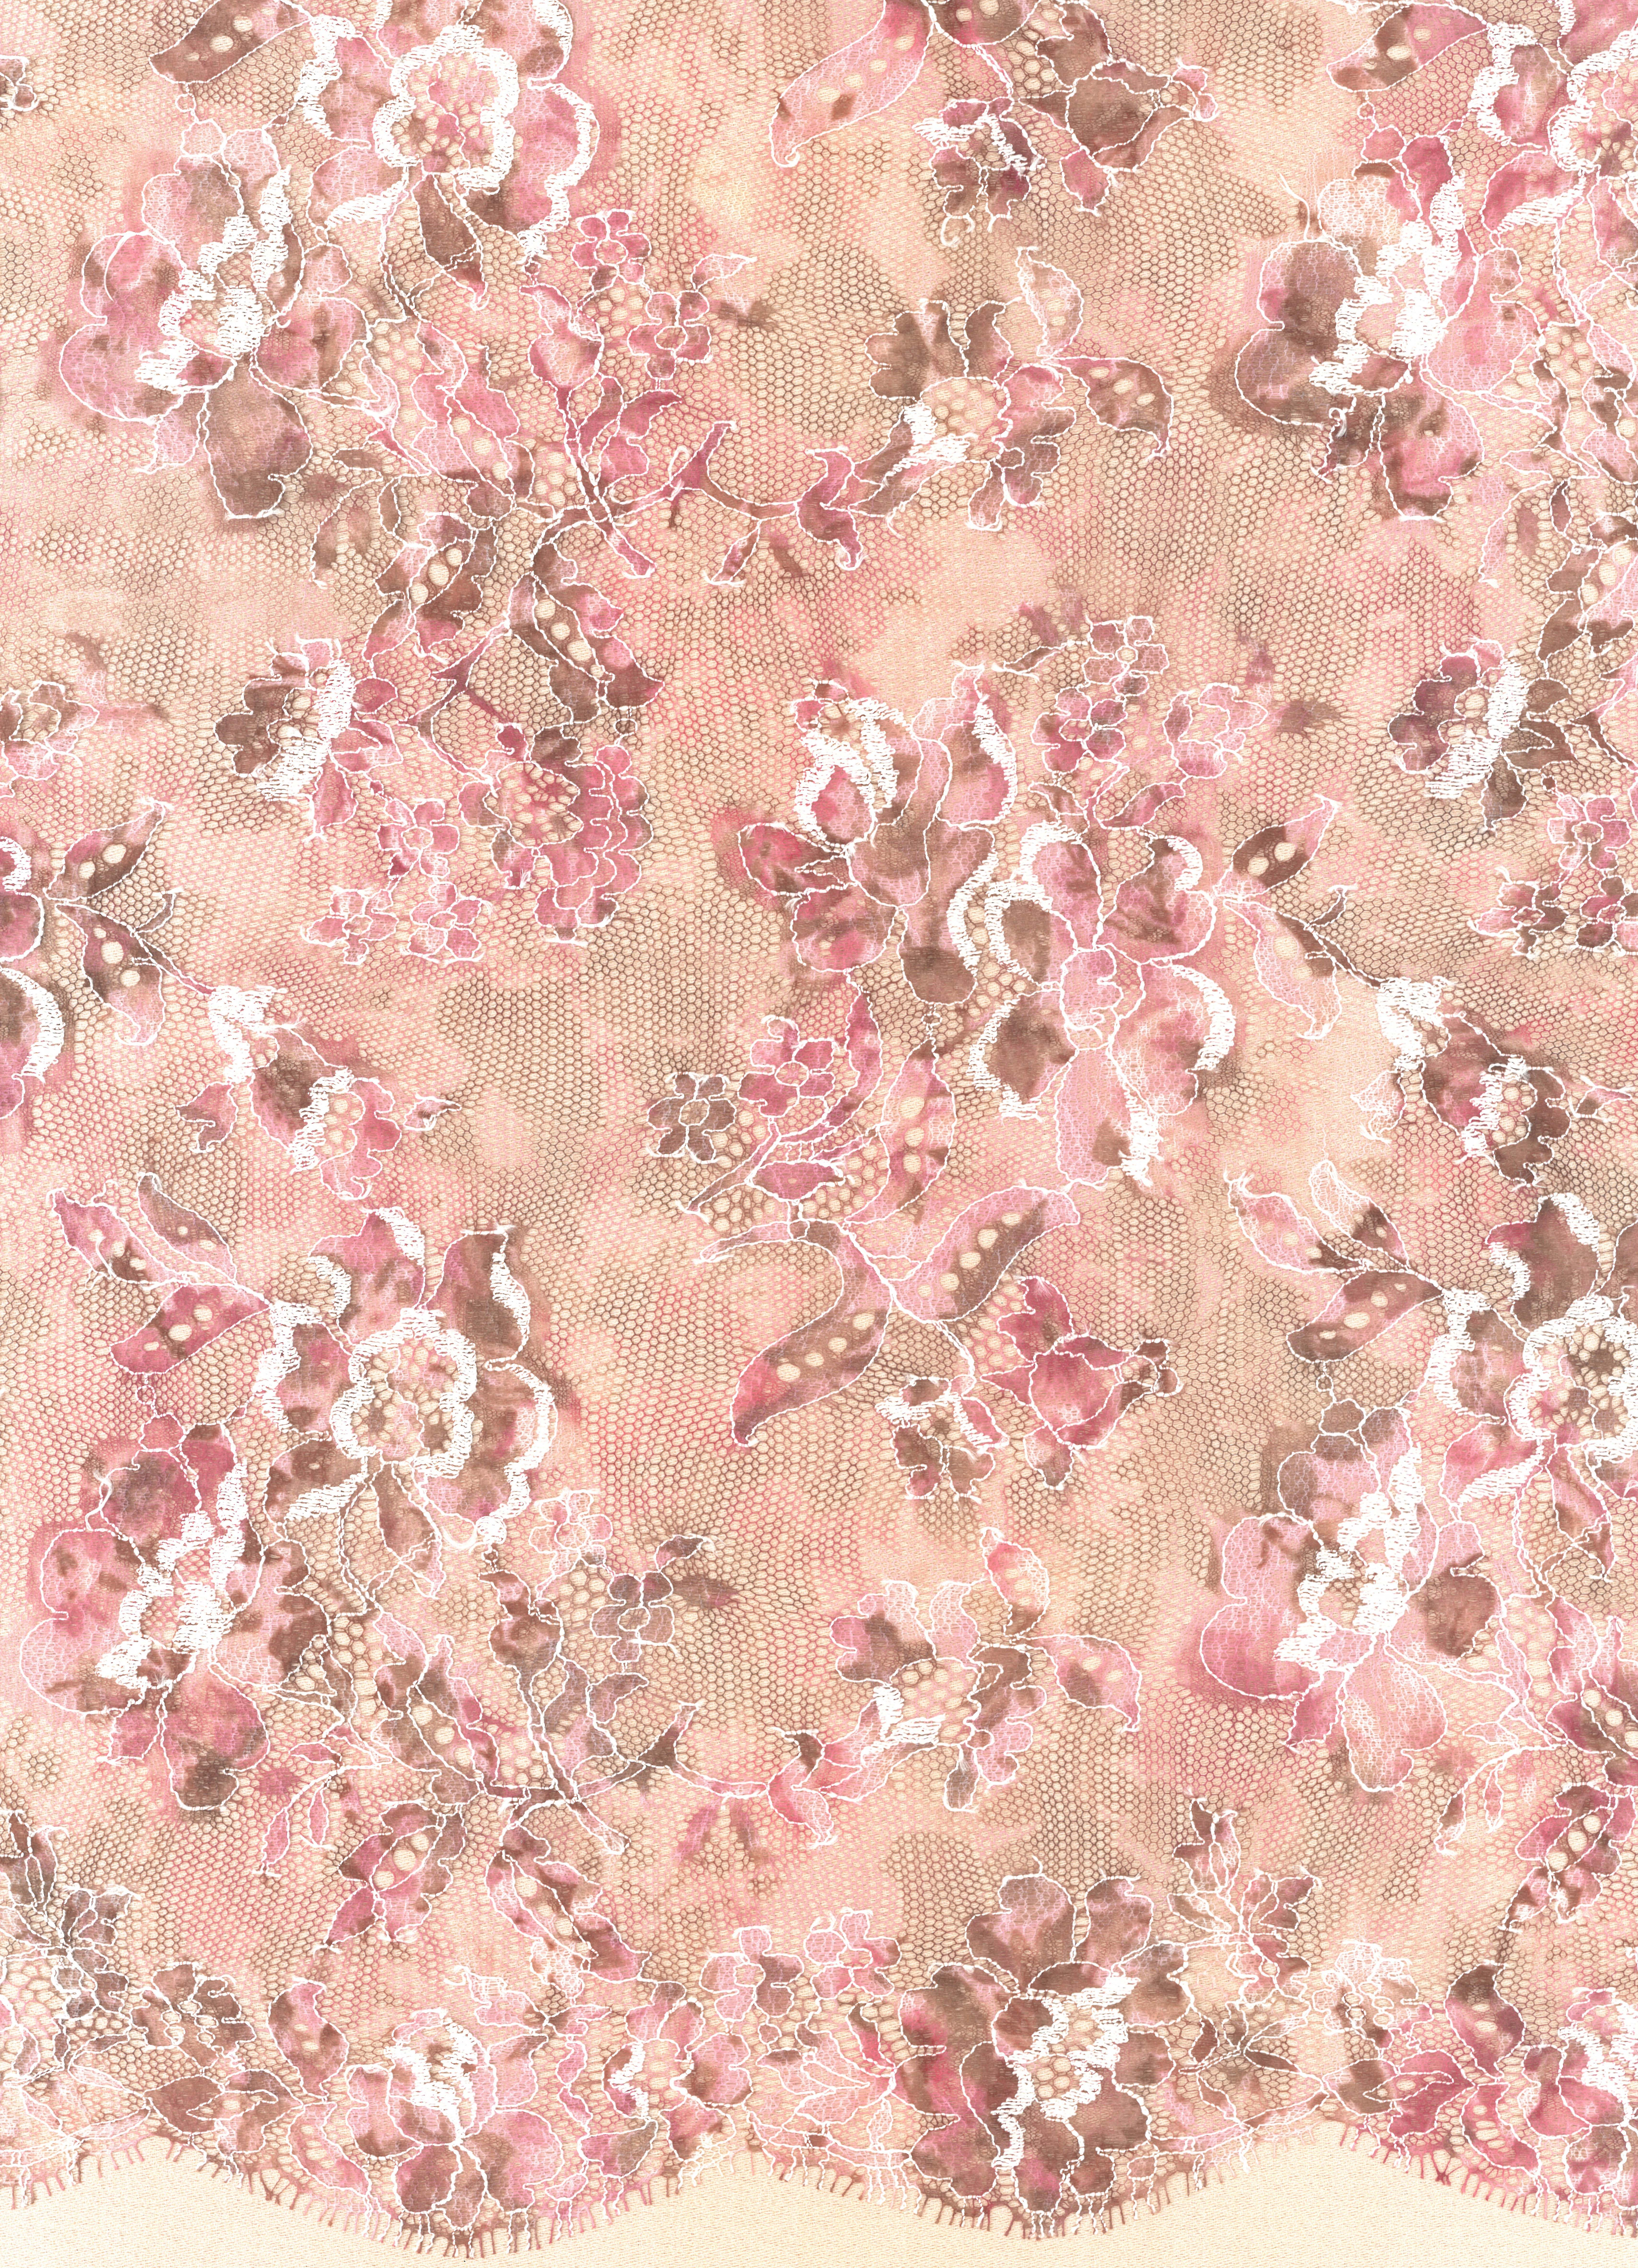 PRINTED FRENCH LACE - PINK